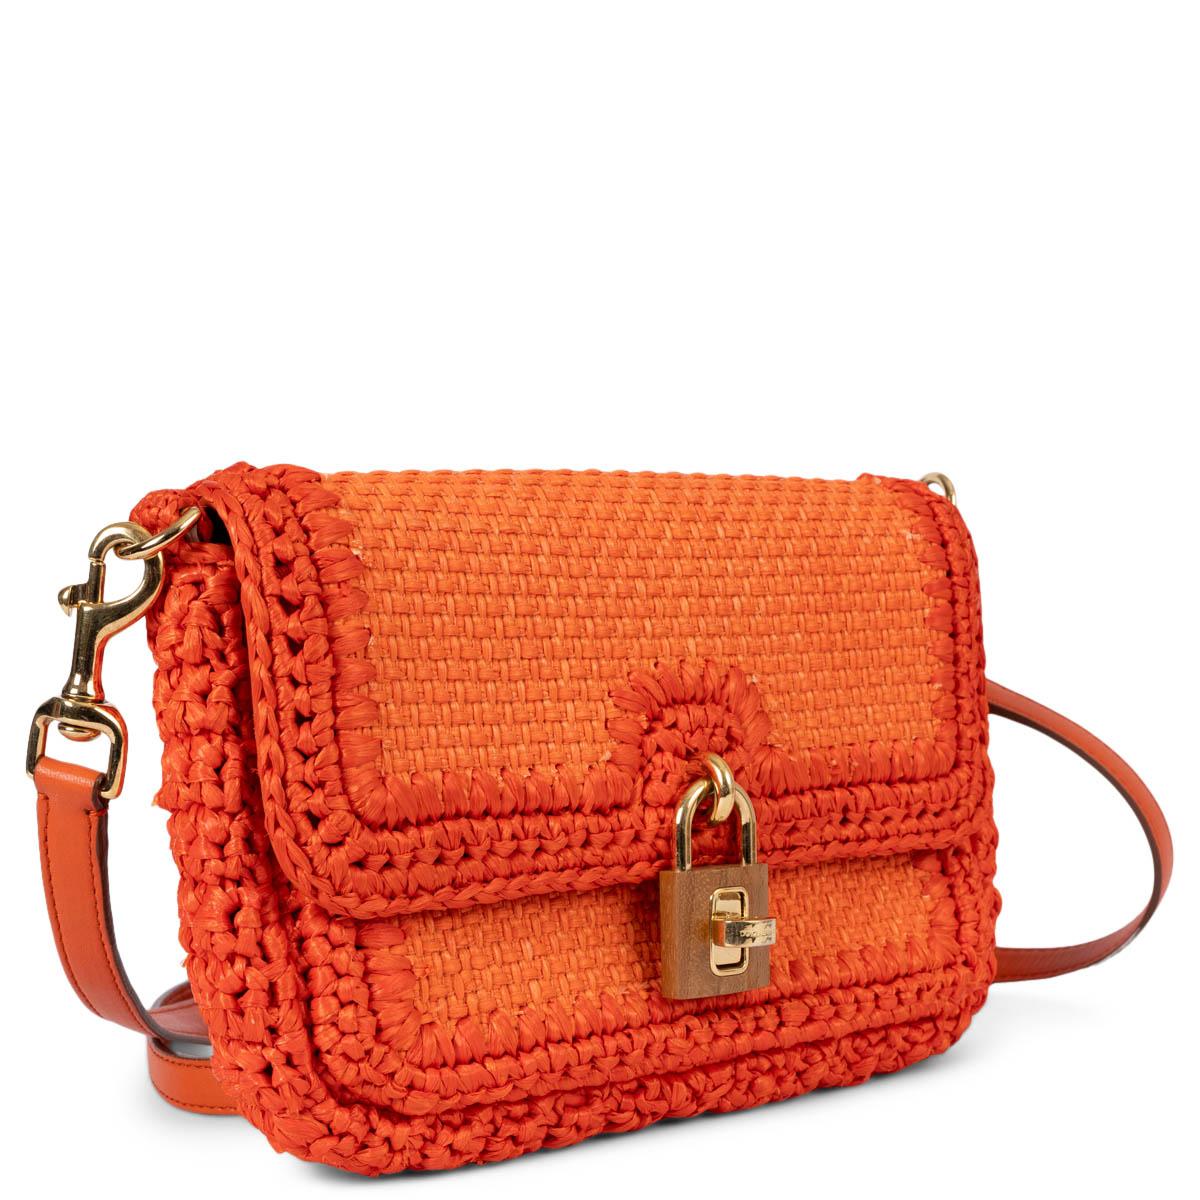 100% authentic Dolce & Gabbana Miss Bonita shoulder bag in orange raffia. The design features a gold-tone metal and wood padlock and is lined in classic leopard print canvas with one zipper pocket against the back. Come with an adjustable and